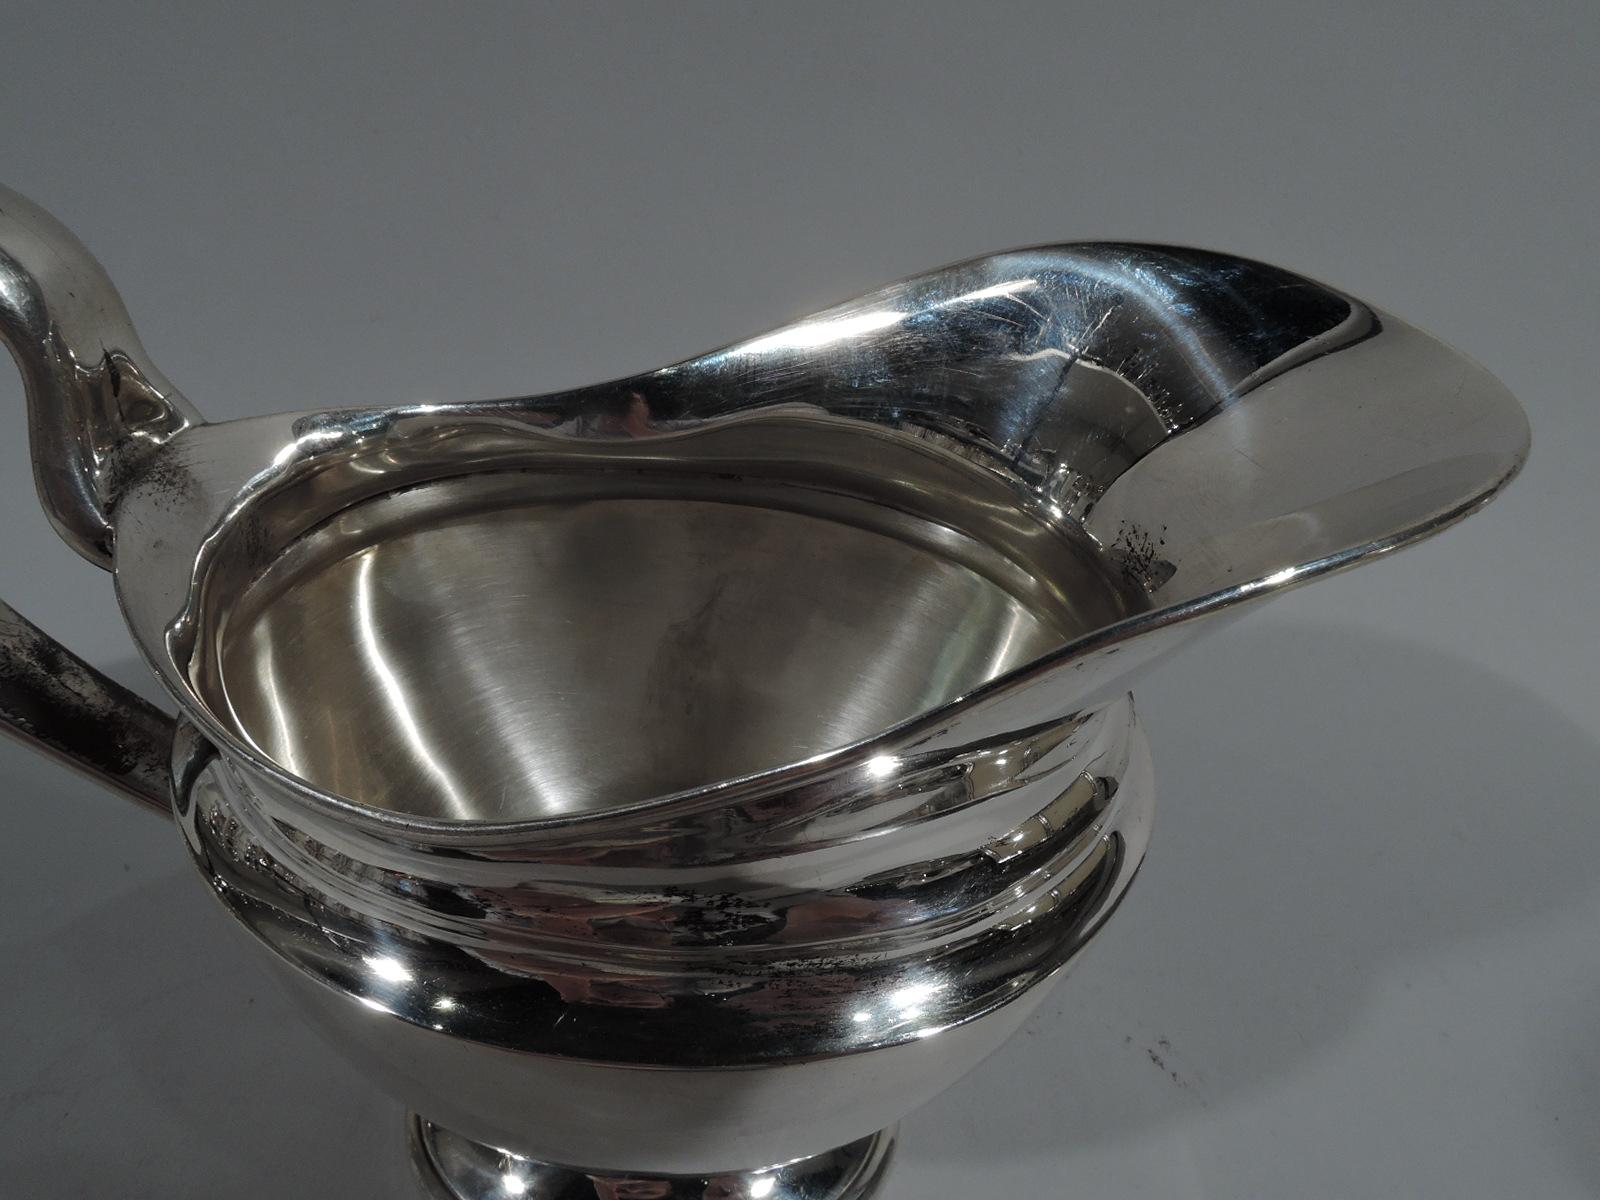 Edwardian classical sterling silver creamer. Made by Tiffany & Co. in New York. Ovoid body with high looping scroll handle, concave shoulder, helmet mouth, and raised foot. Fully marked including pattern no. 15416 (first produced in 1902) and